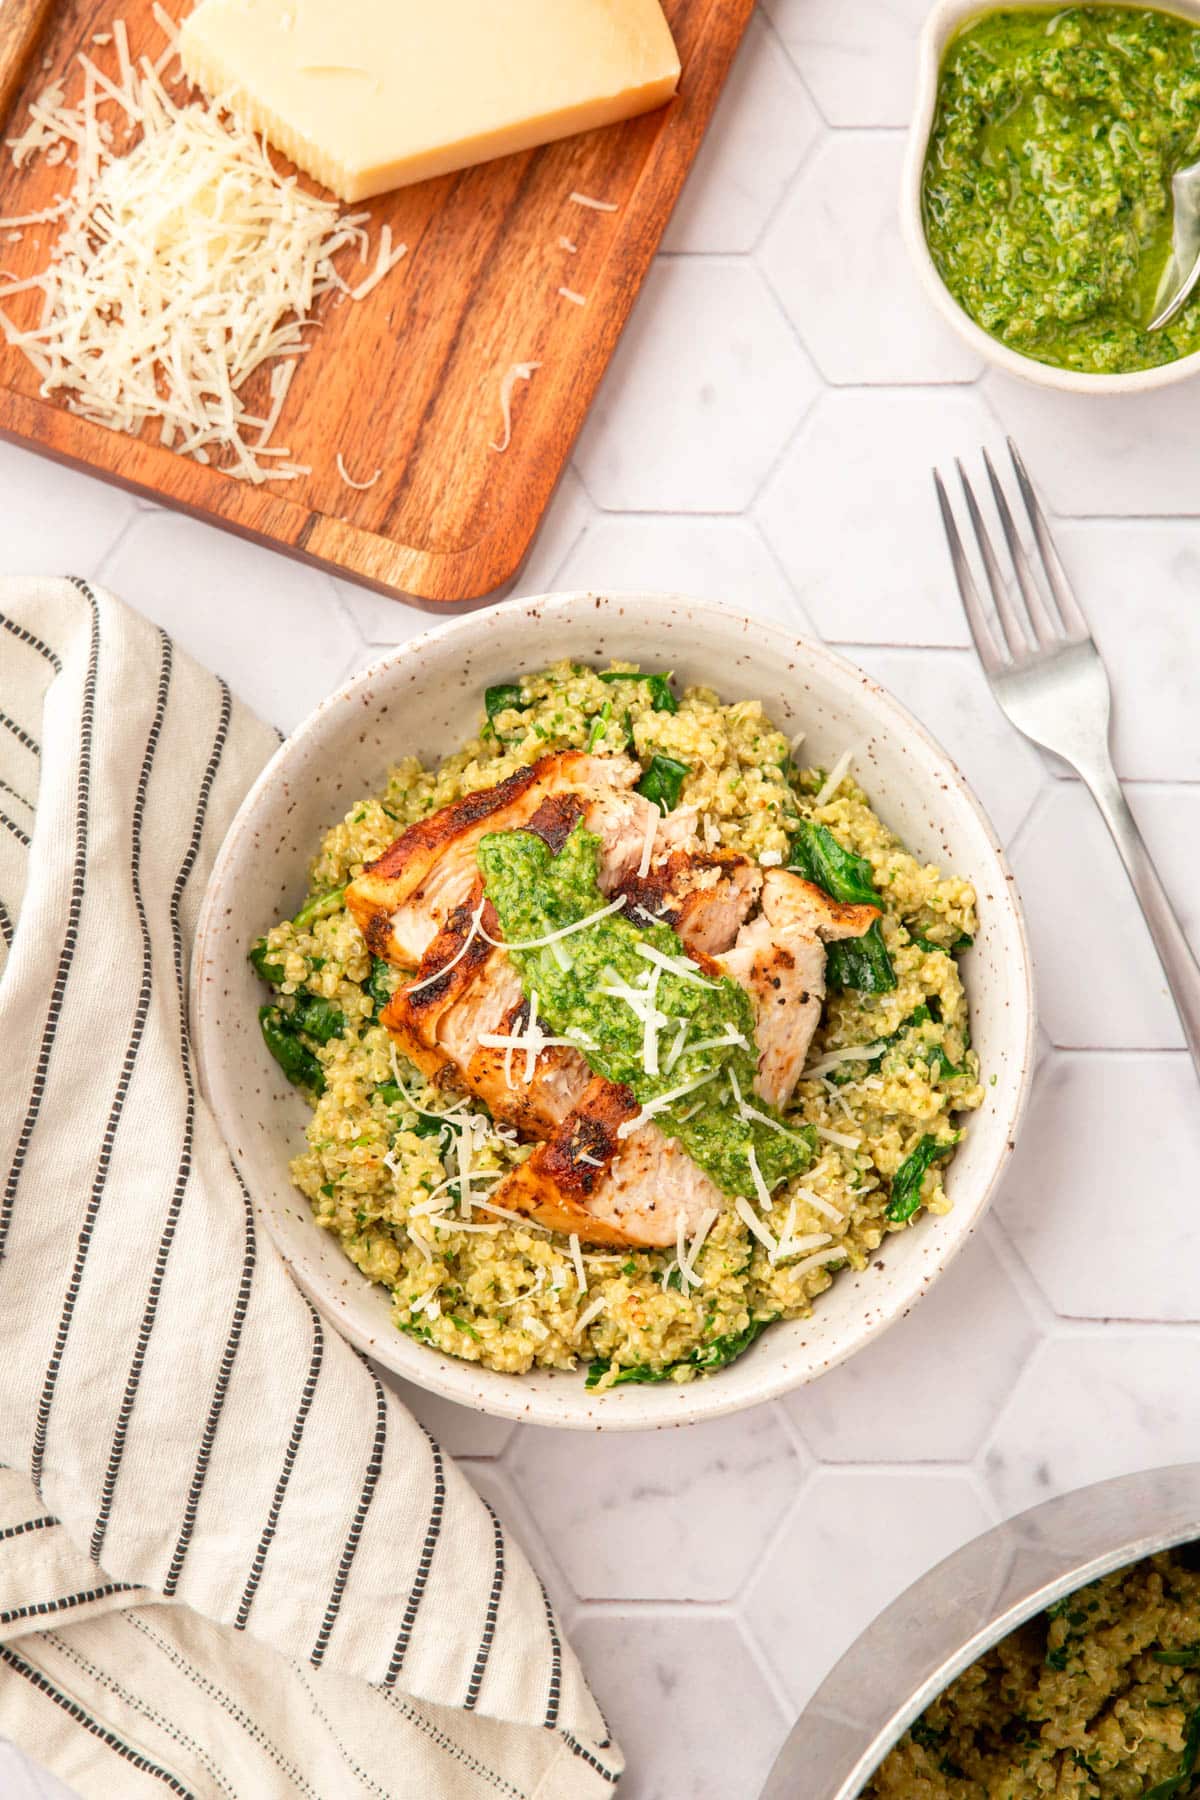 A bowl of pesto chicken on top of a bed of spinach quinoa with a fork, a bowl of parsley pesto, a block of parmesan cheese that has been partially shredded.